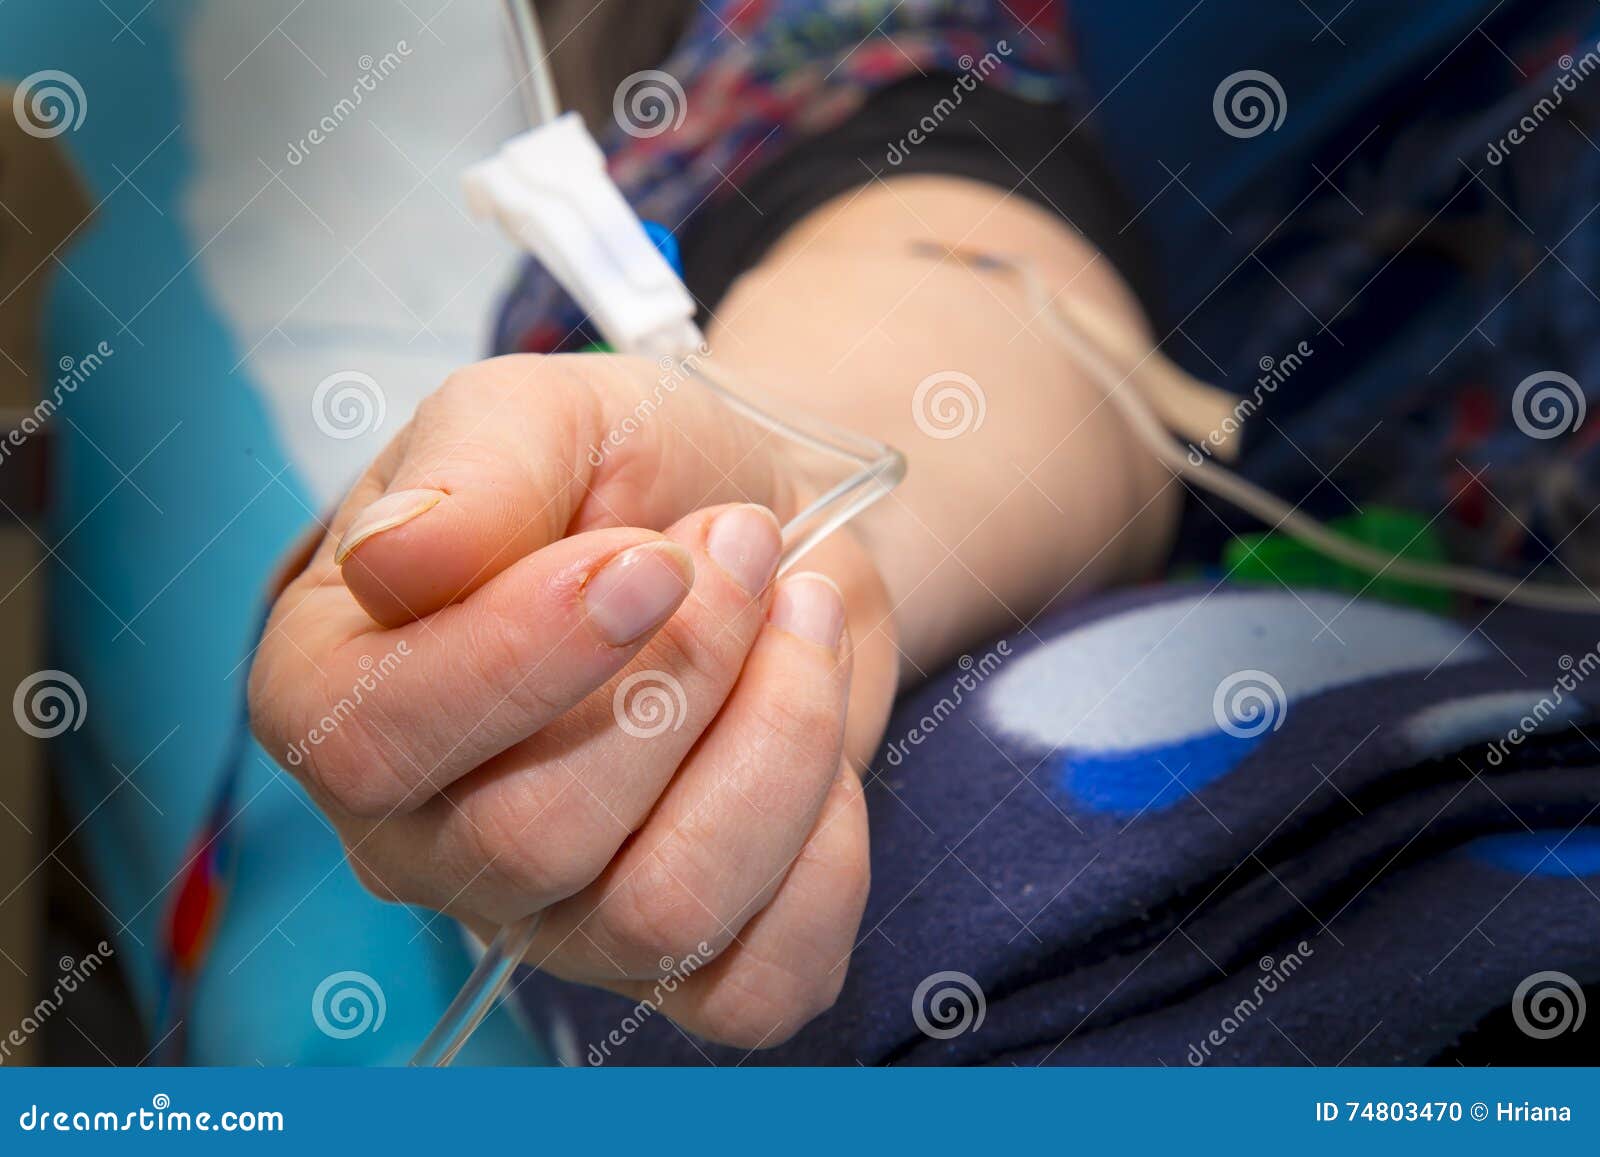 intravenous infusion therapy on mature woman